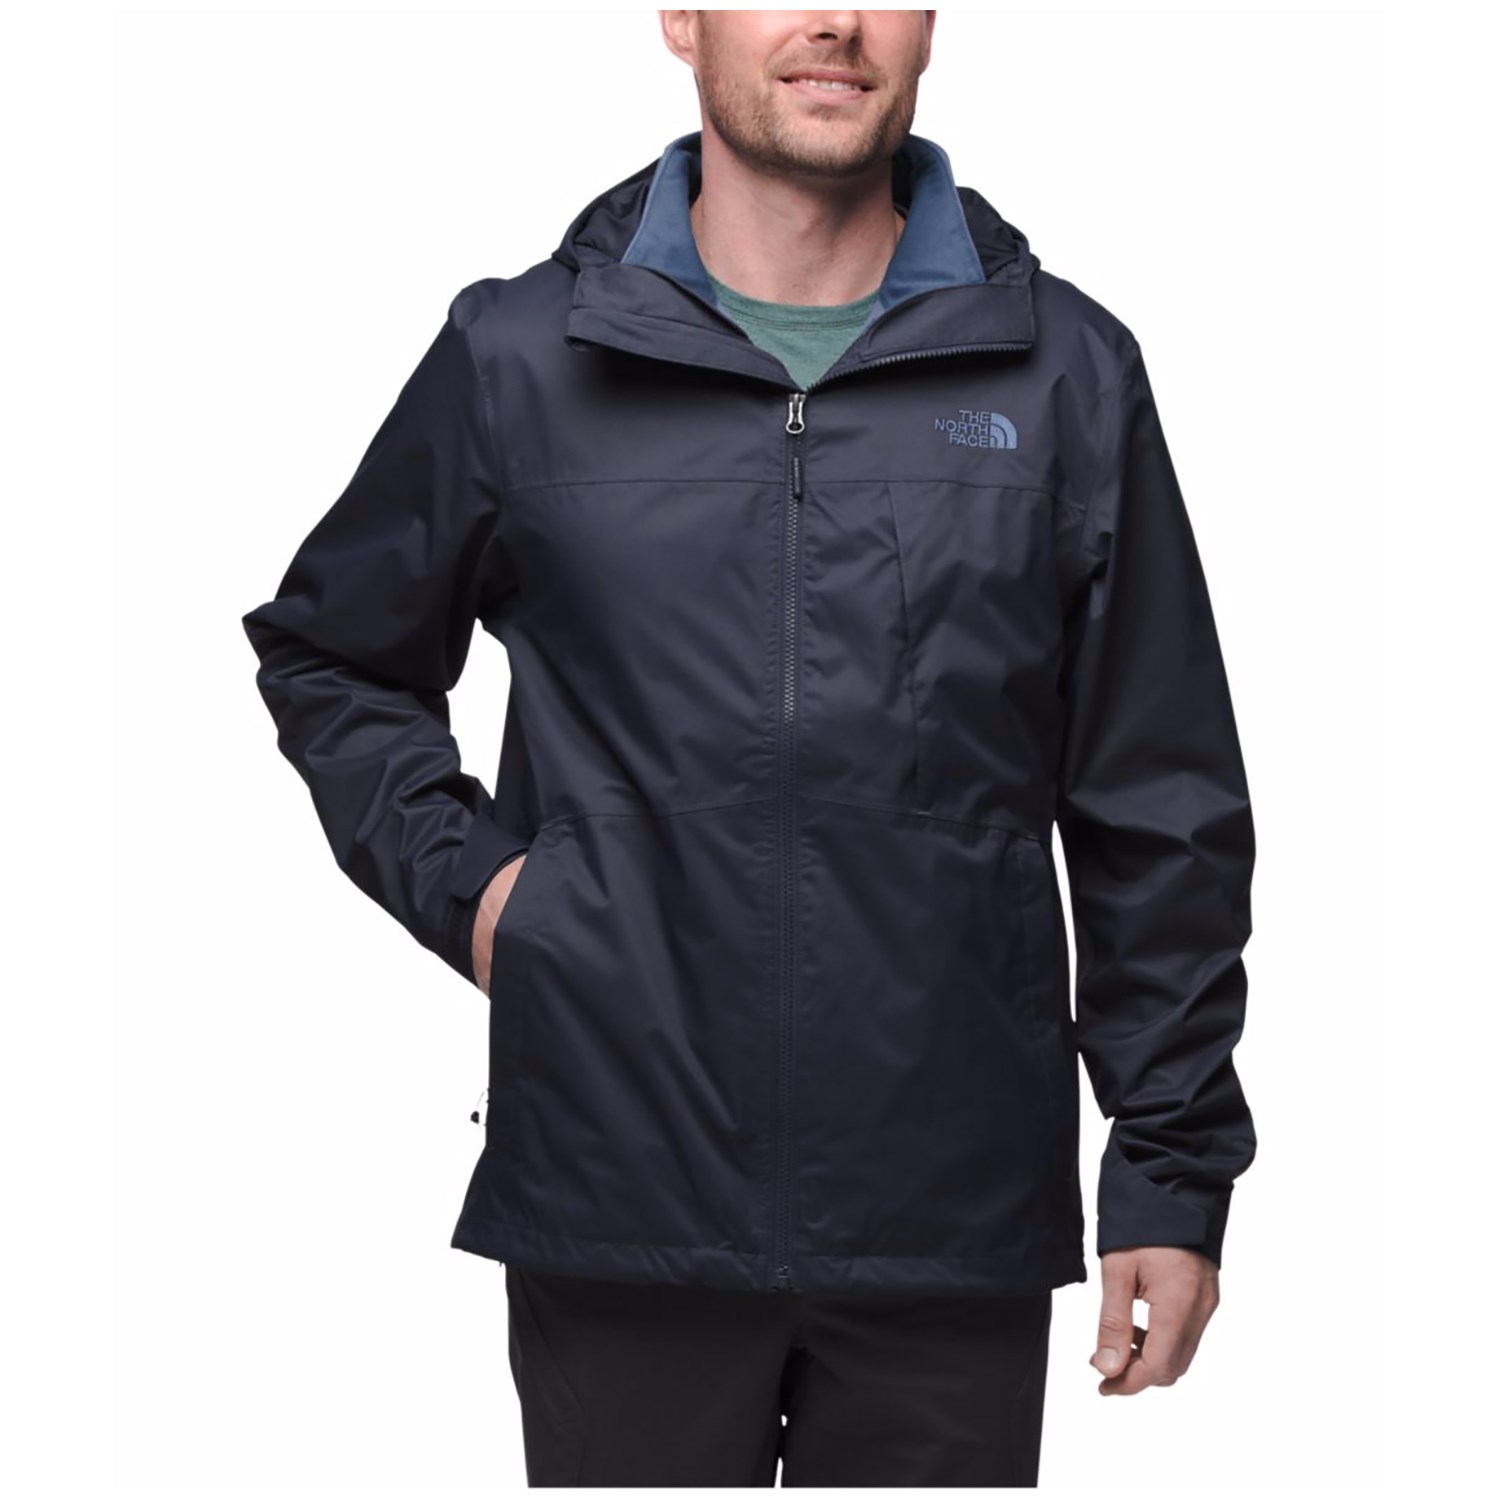 north face arrowood triclimate jacket